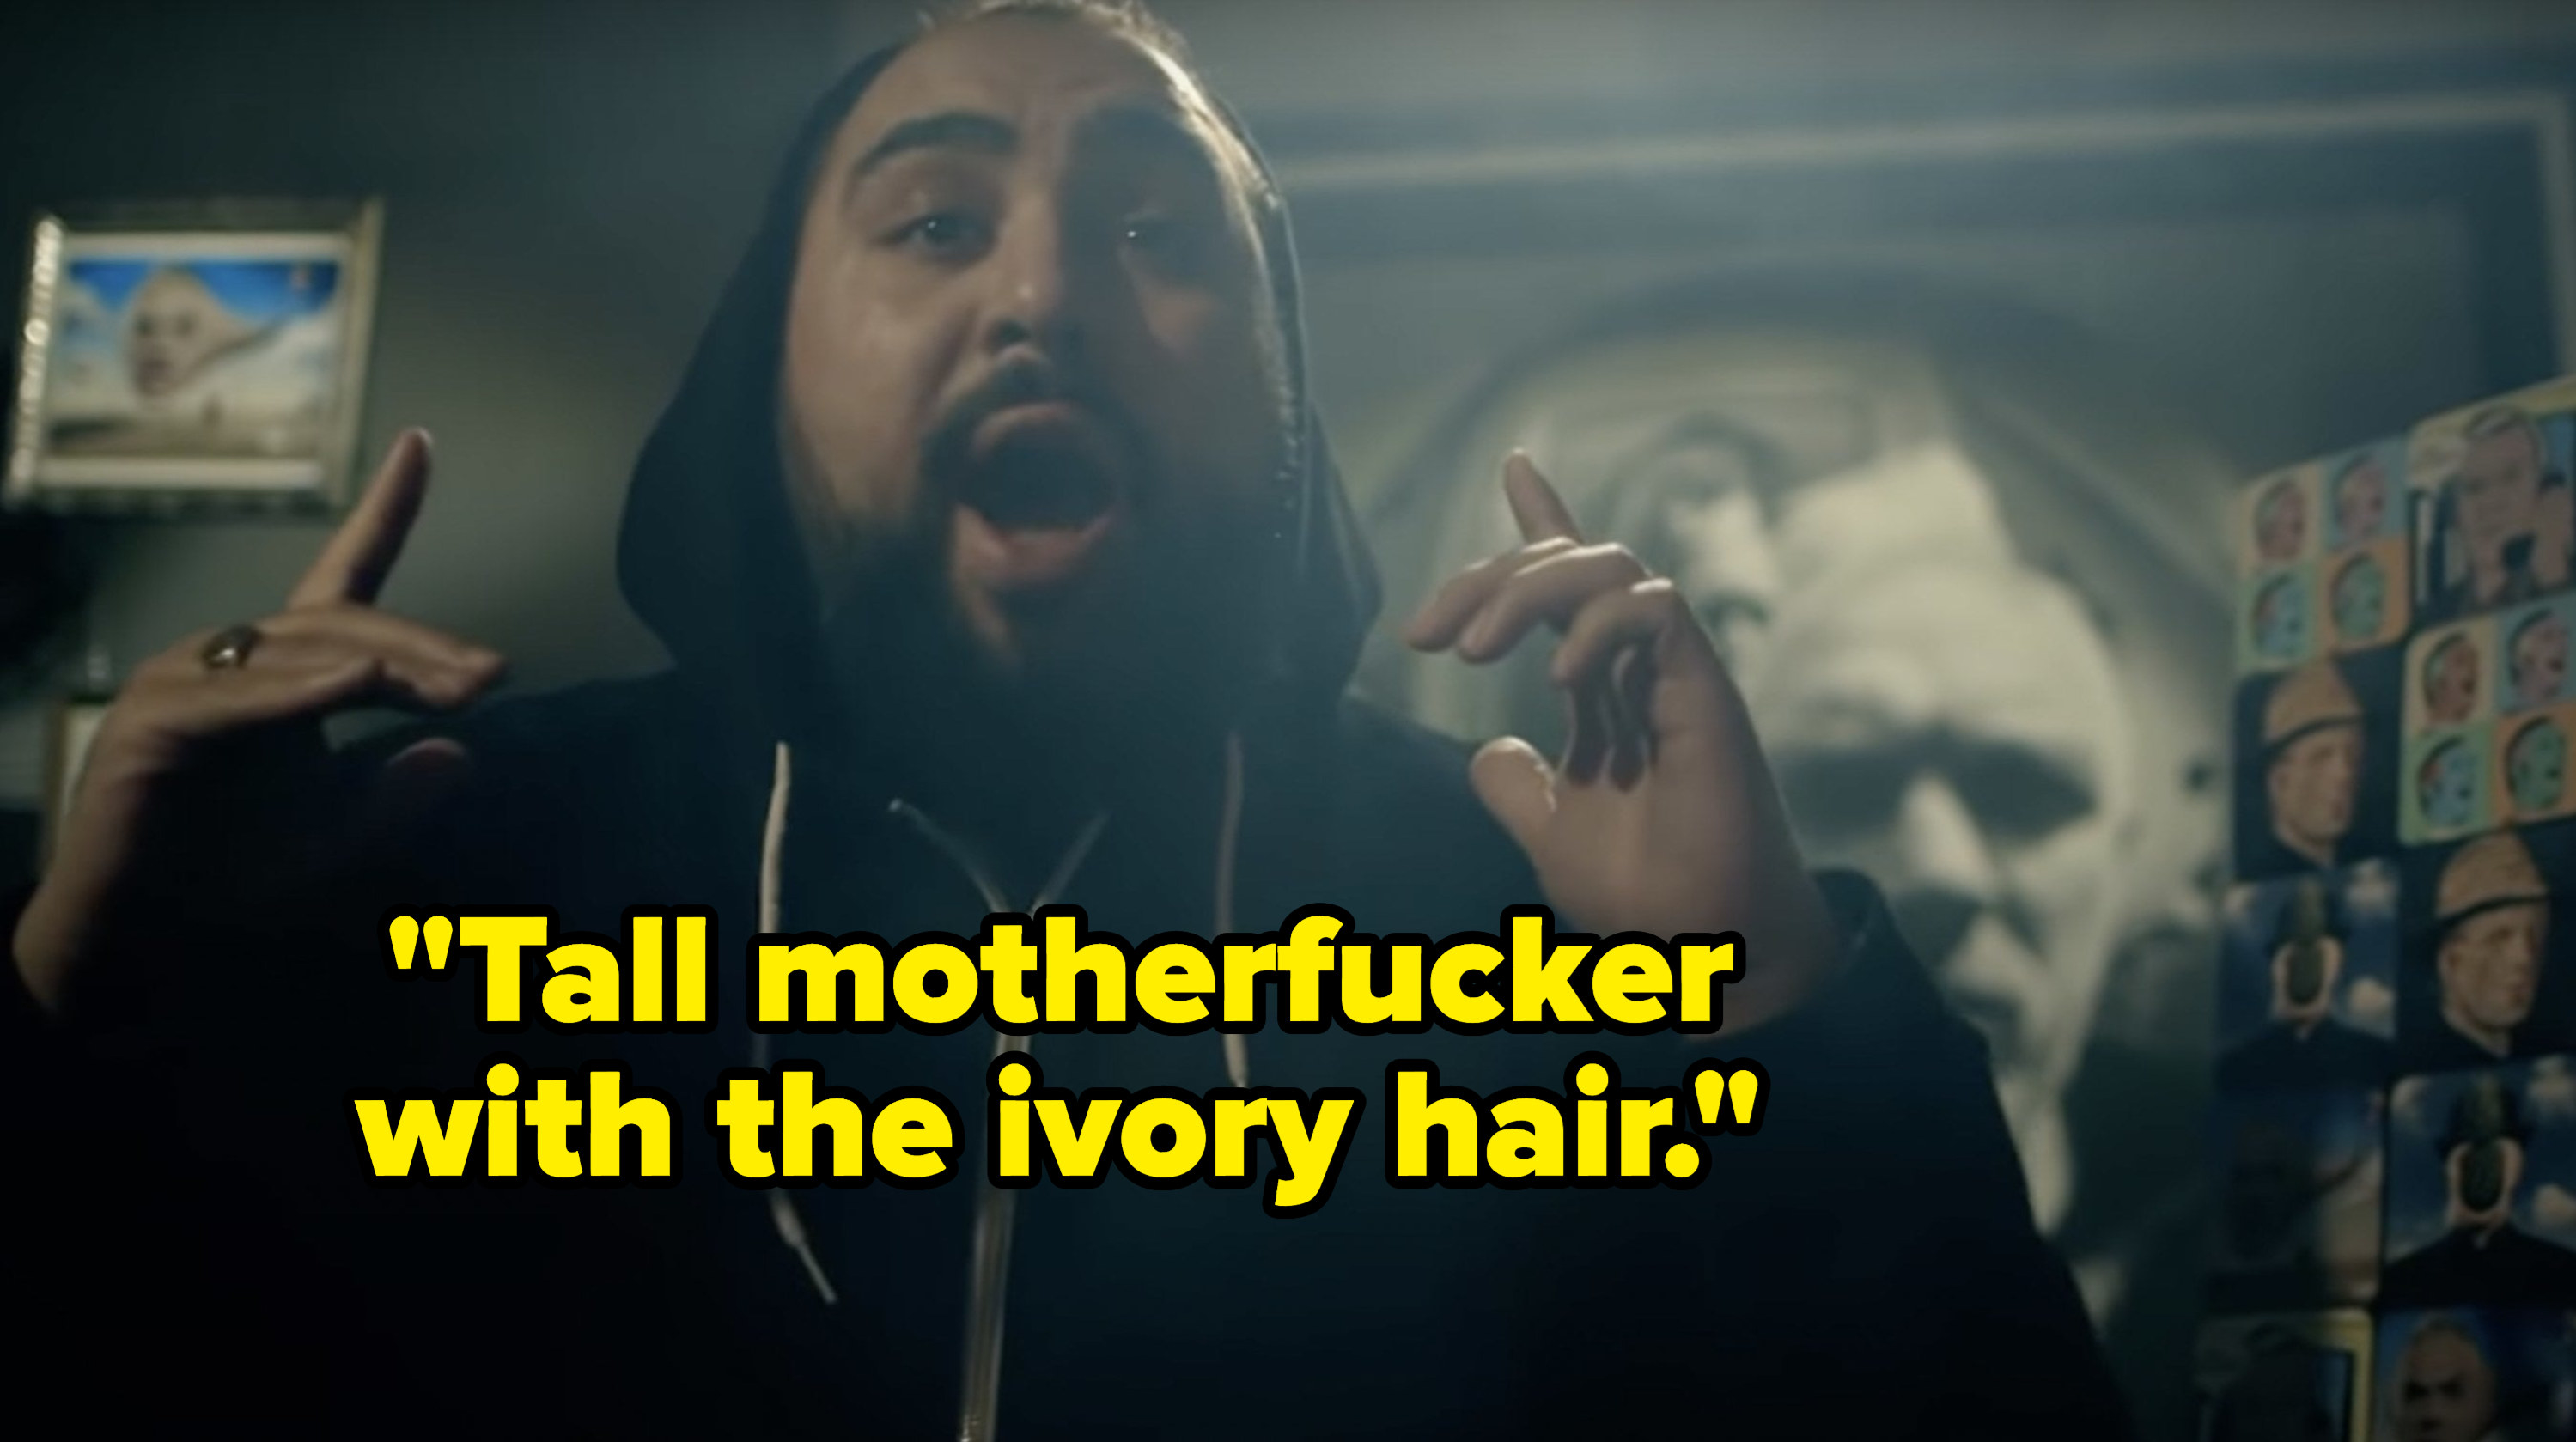 Asim Chaudhry says, Tall motherfucker with the ivory hair